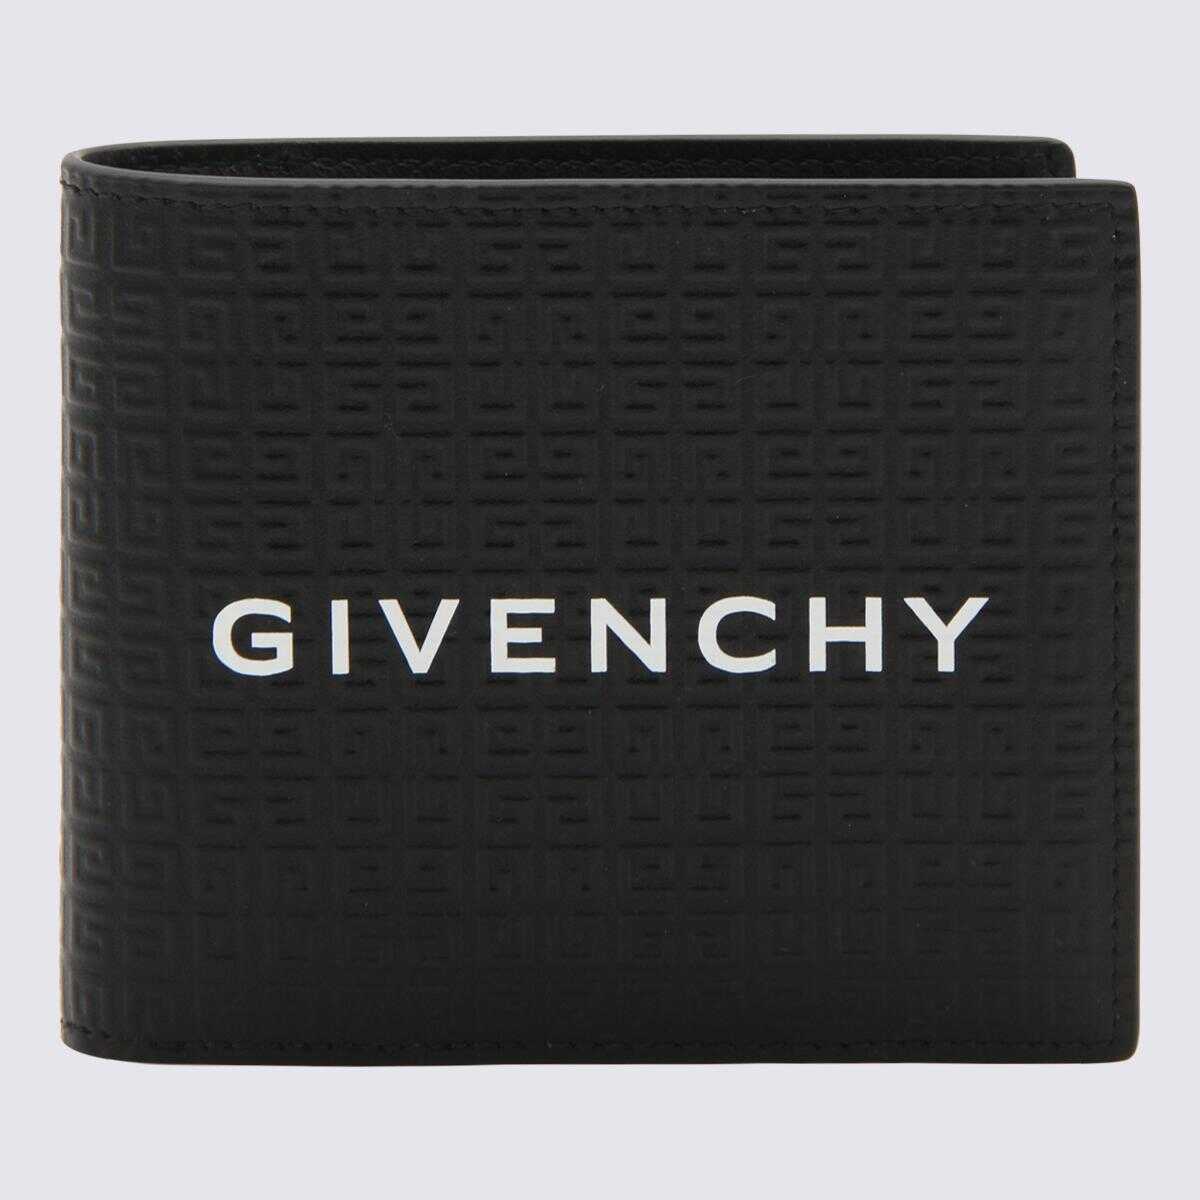 Givenchy GIVENCHY BLACK LEATHER BIFOLD WALLET BLACK